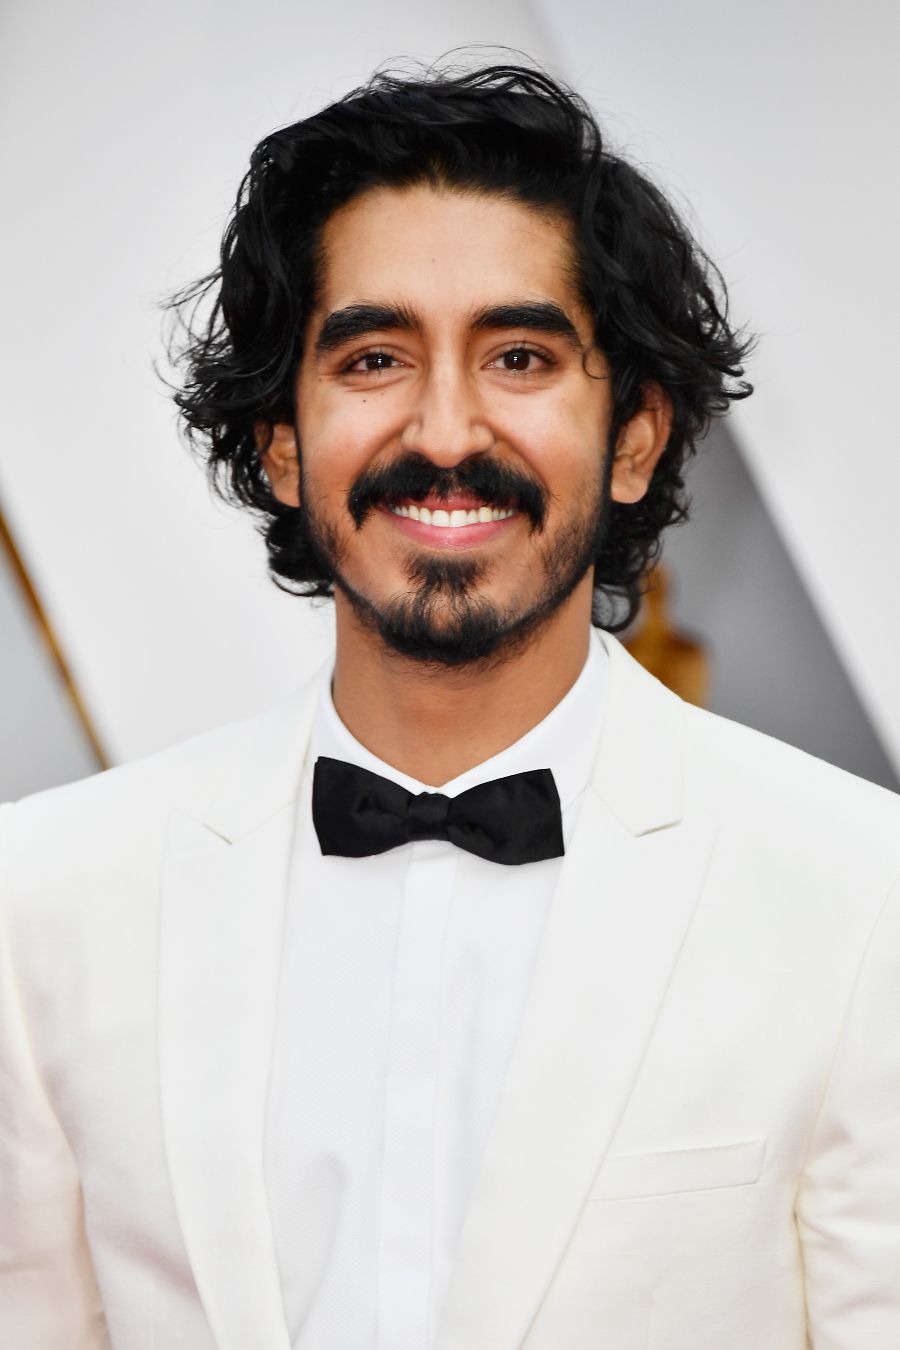 89th Annual Academy Awards - Arrivals HOLLYWOOD, CA - FEBRUARY 26: Actor Dev Patel attends the 89th Annual Academy Awards at Hollywood & Highland Center on February 26, 2017 in Hollywood, California. (Photo by Frazer Harrison/Getty Images) long hairstyles for men